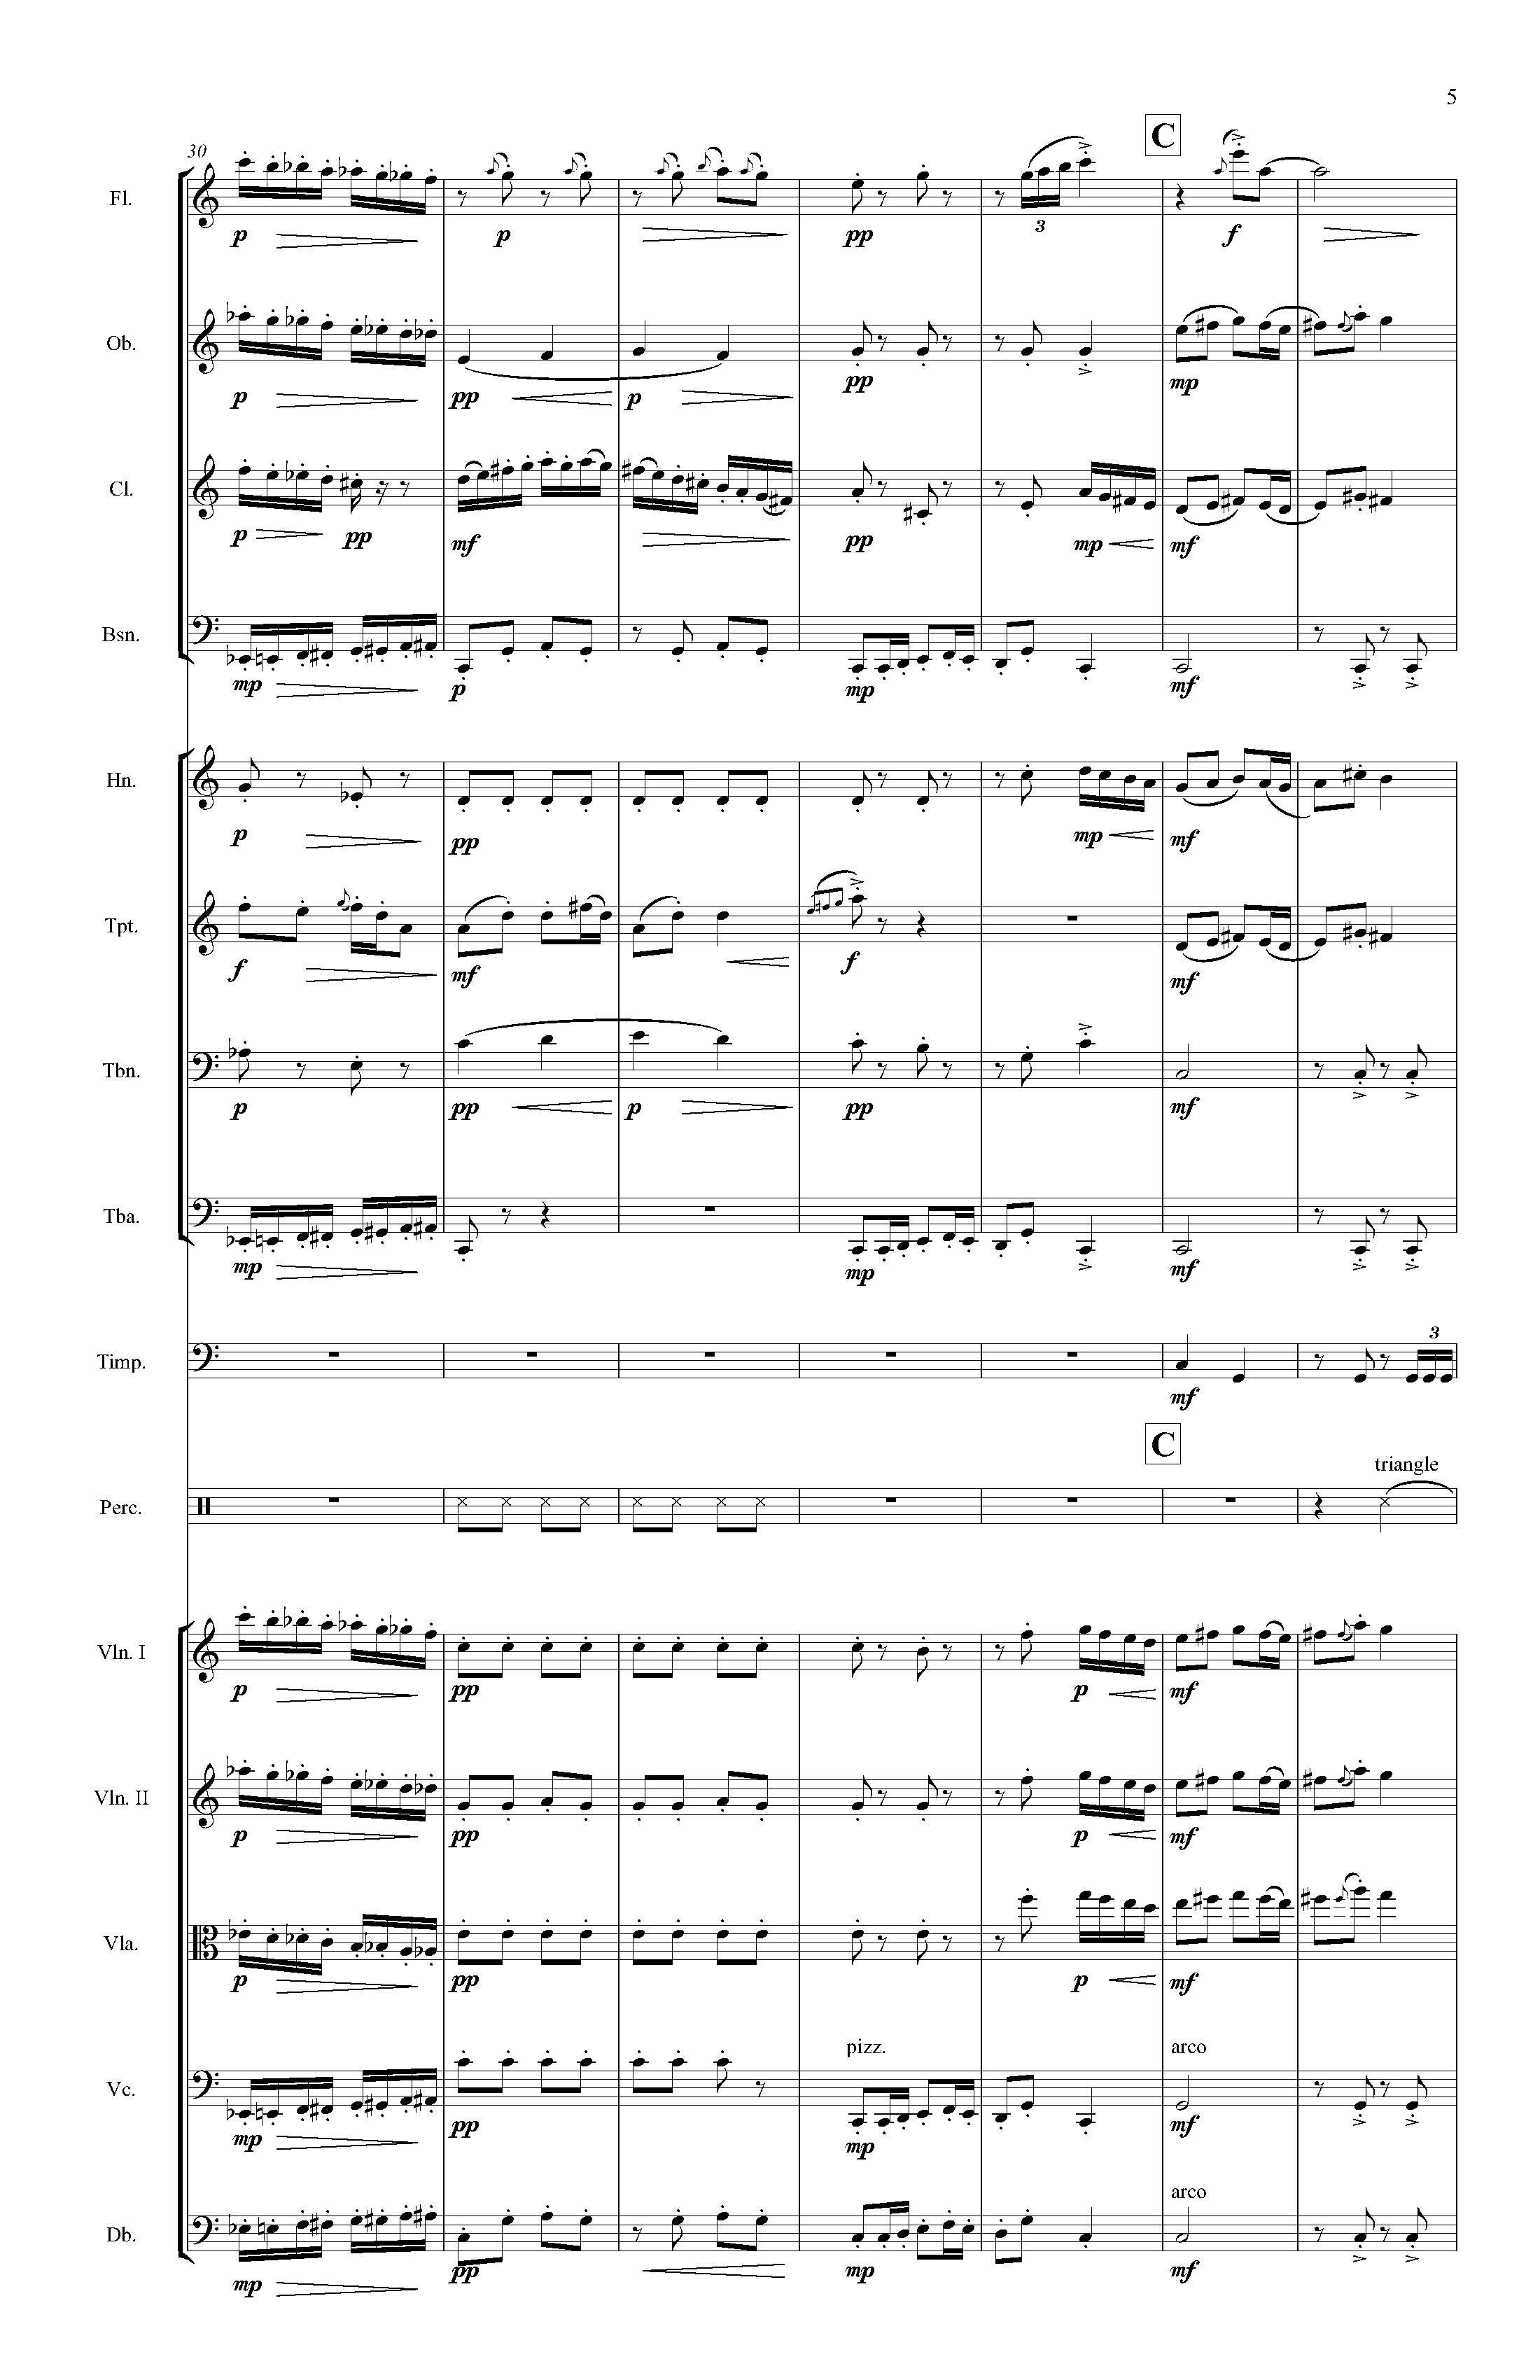 Fantasy on a French Carol - Complete Score_Page_09.jpg